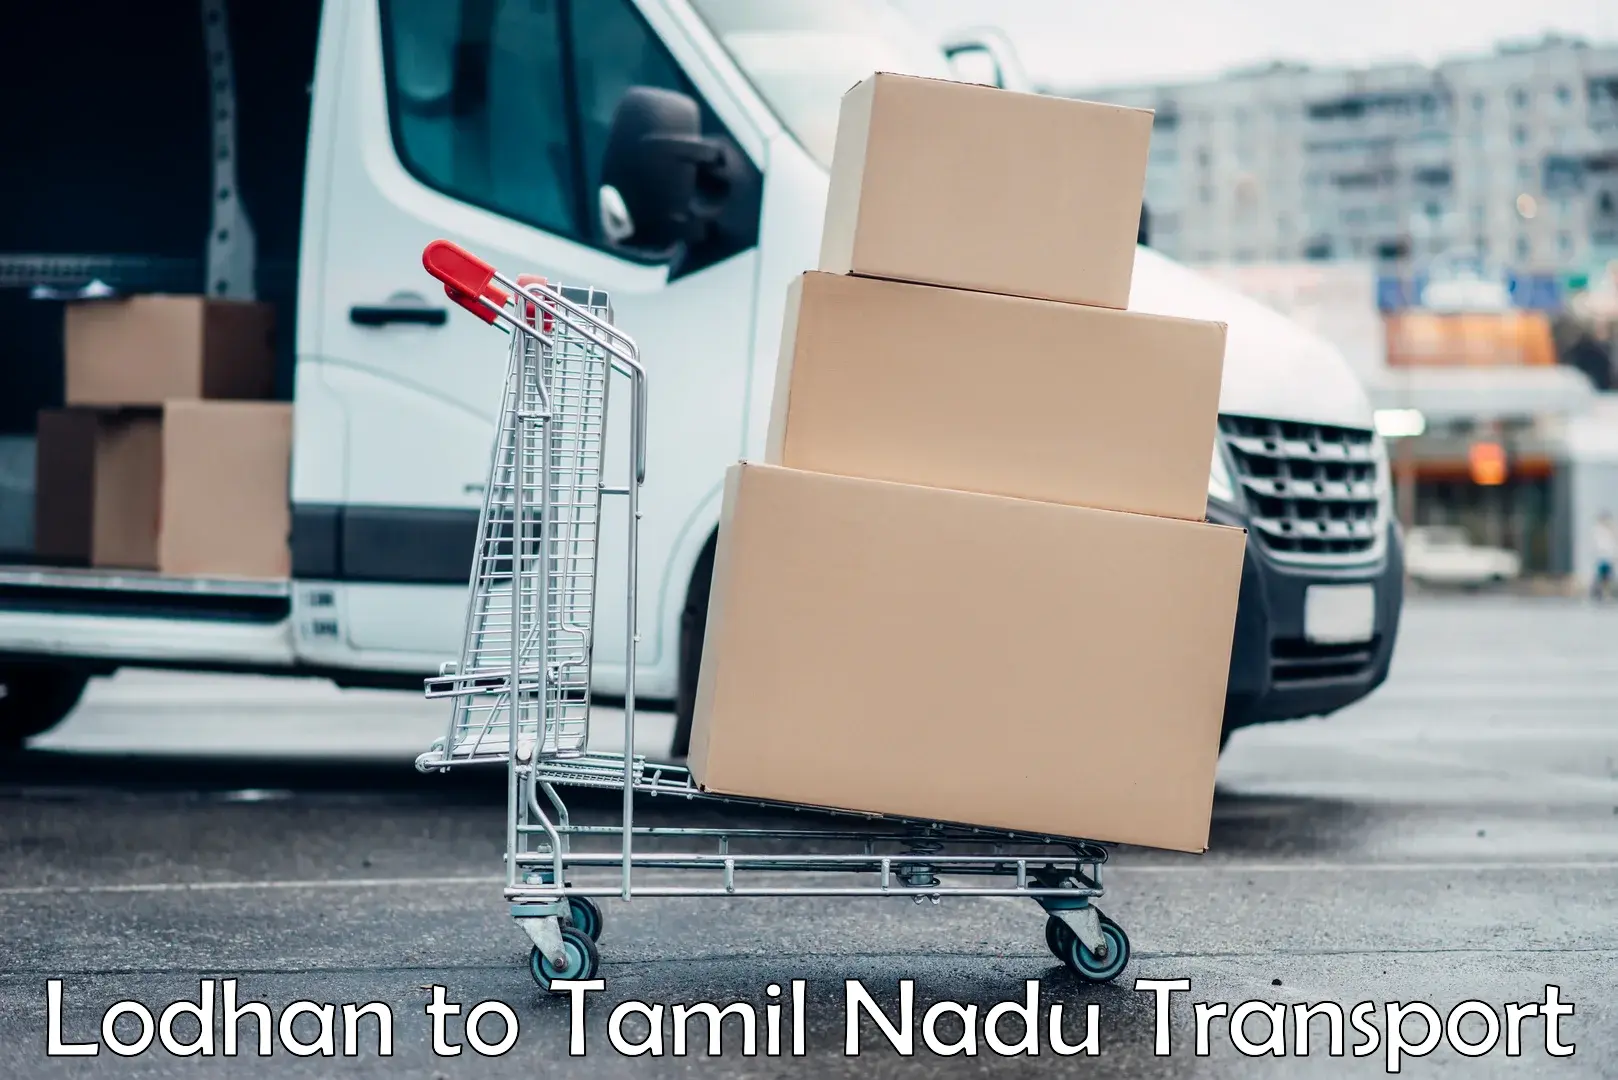 Commercial transport service Lodhan to Melur